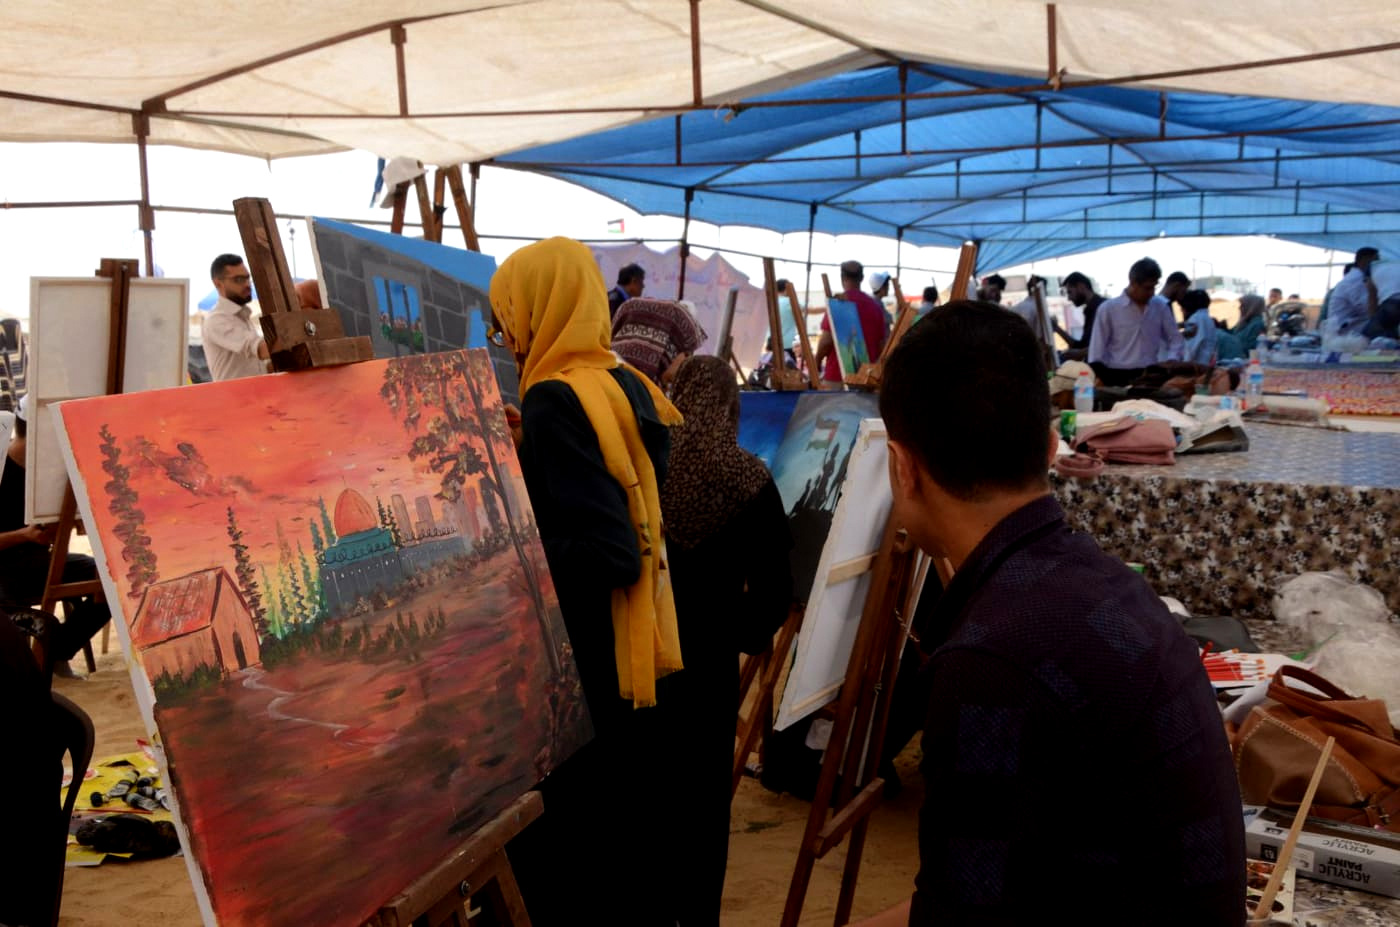 Artists work on original pieces in the art protest tent near the Great Return March protests on the Gaza border. (Photo: Karim Naser)